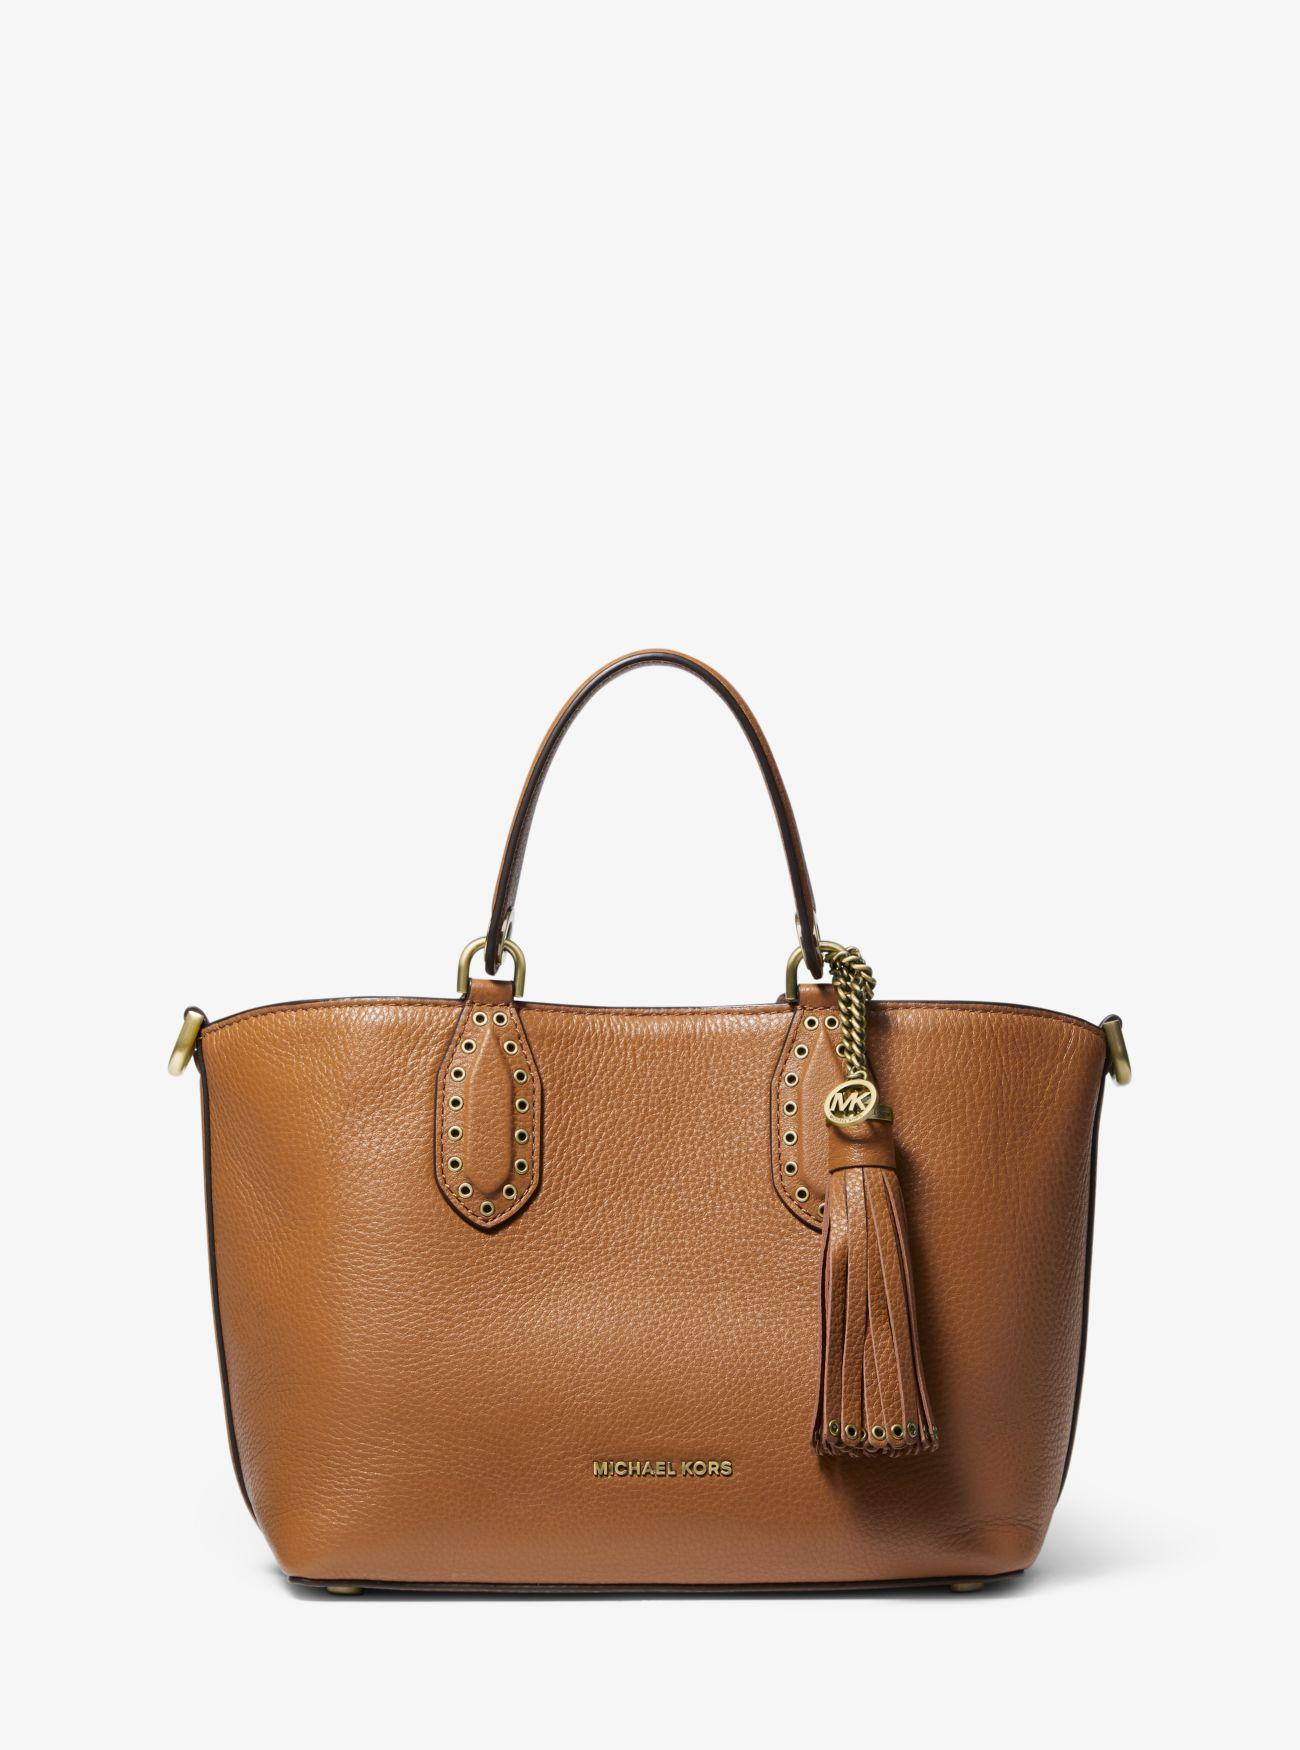 Michael Kors Brooklyn Small Pebbled Leather Satchel in Brown - Lyst